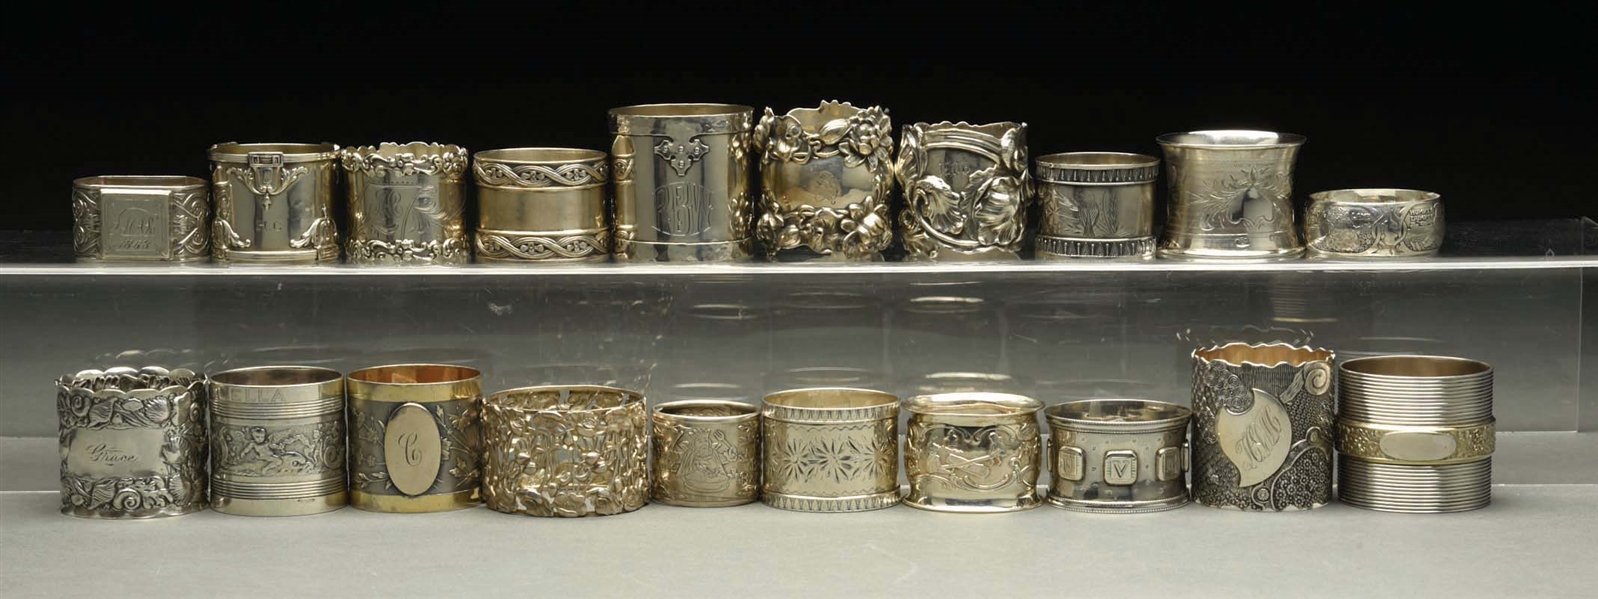 LOT OF 20: STERLING SILVER NAPKIN RINGS.